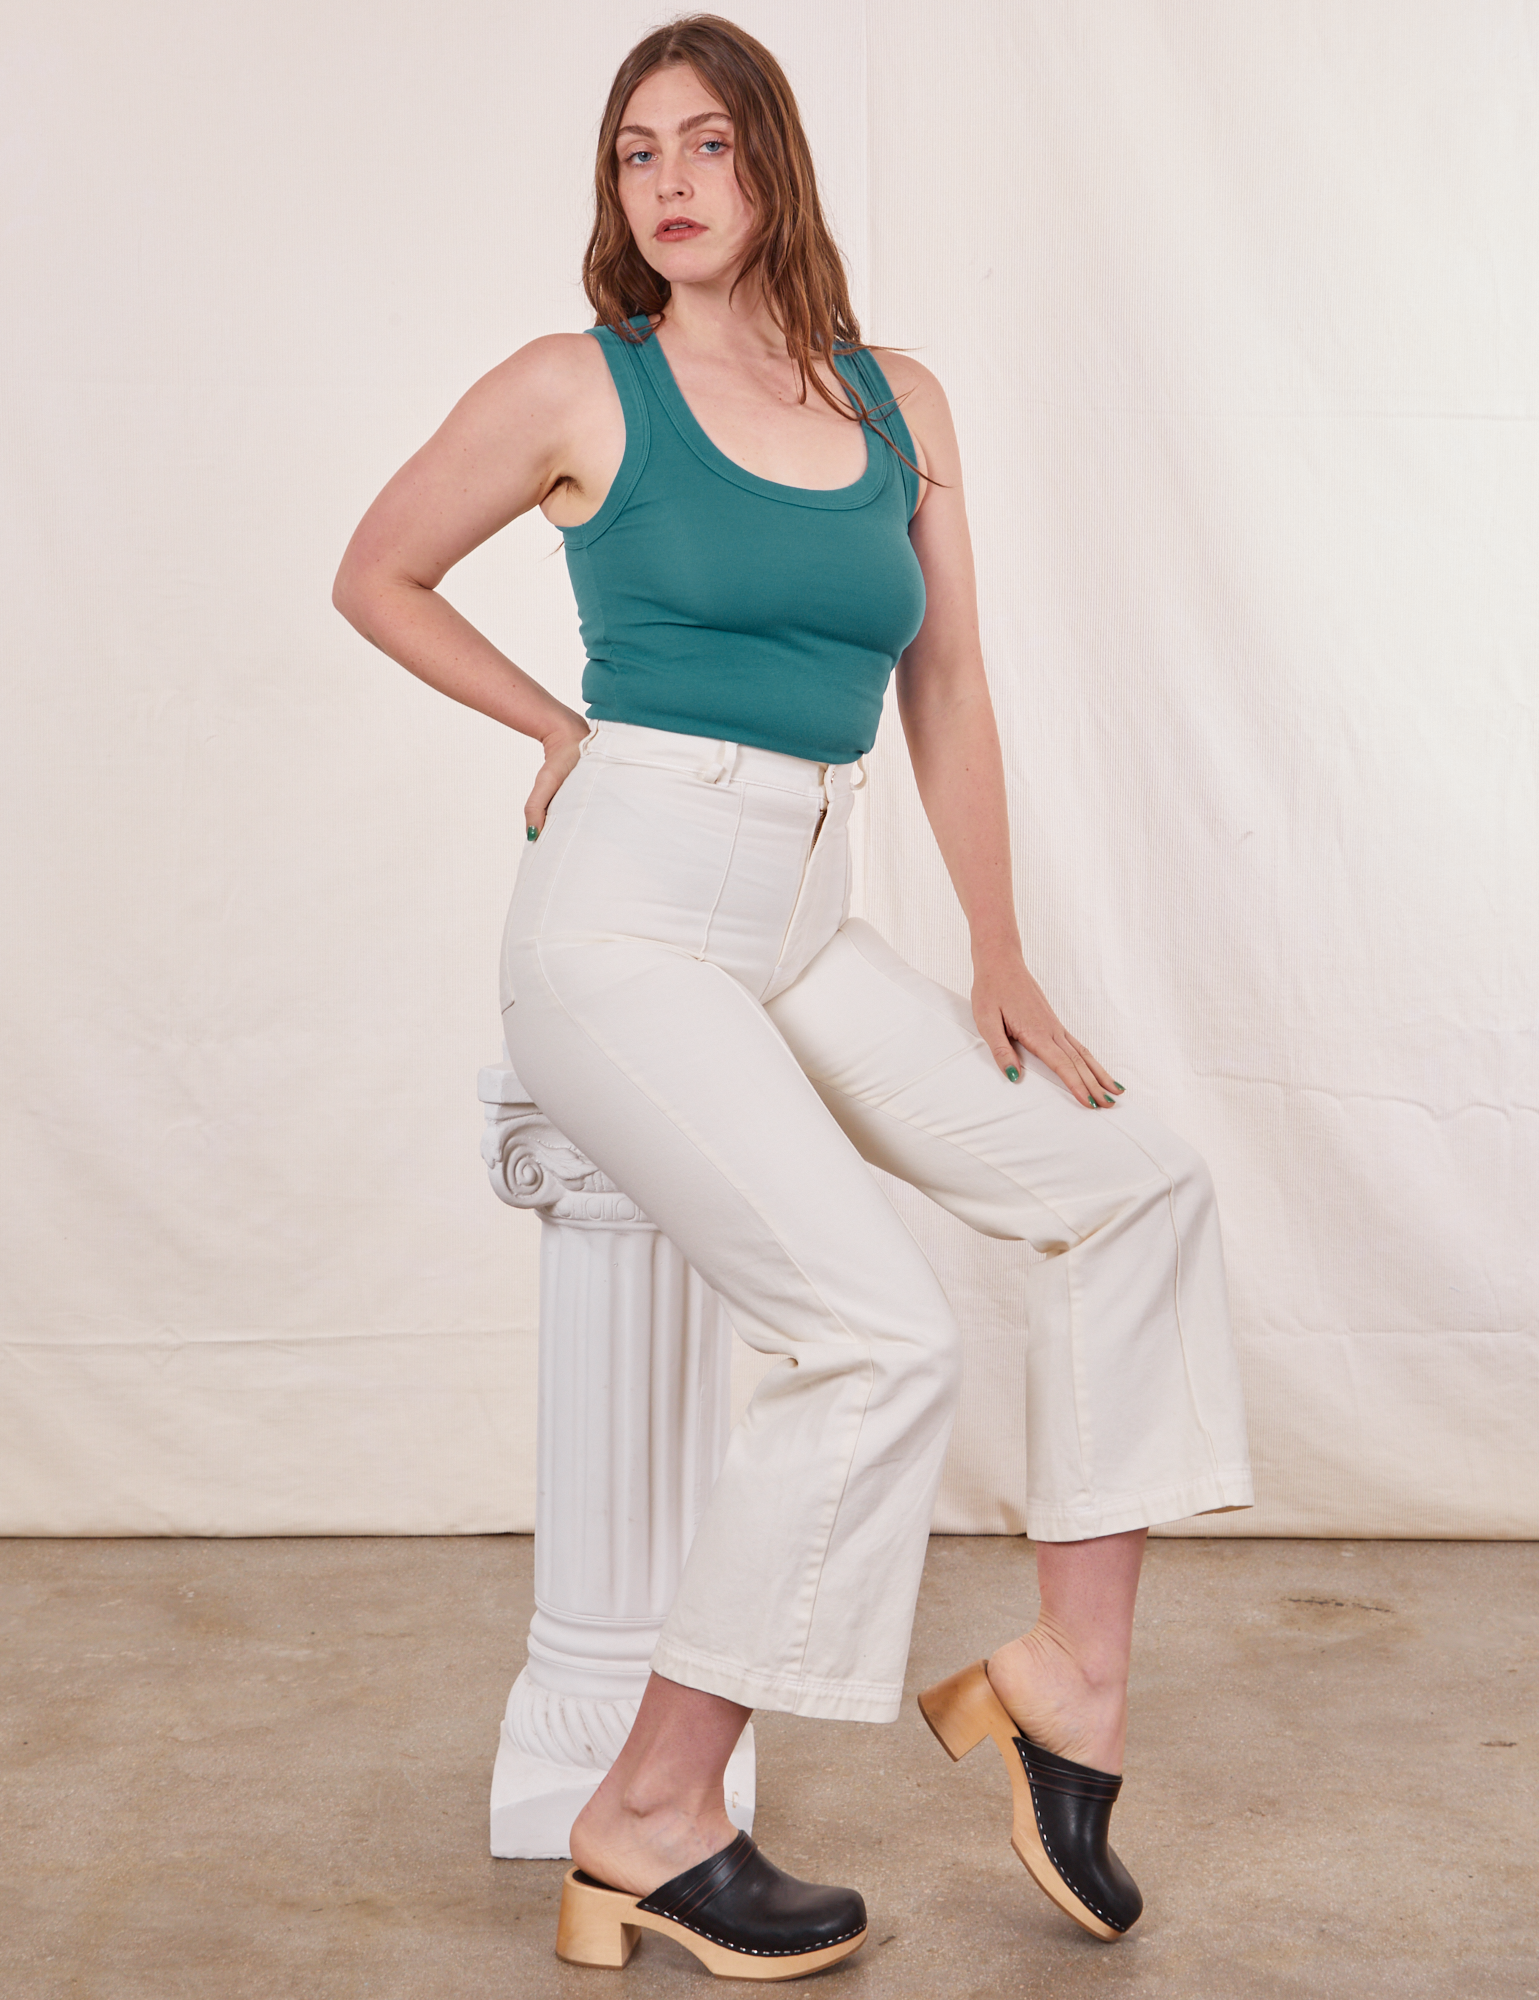 Allison is sitting on a white column wearing Tank Top in Marine Blue paired with vintage tee off-white Western Pants